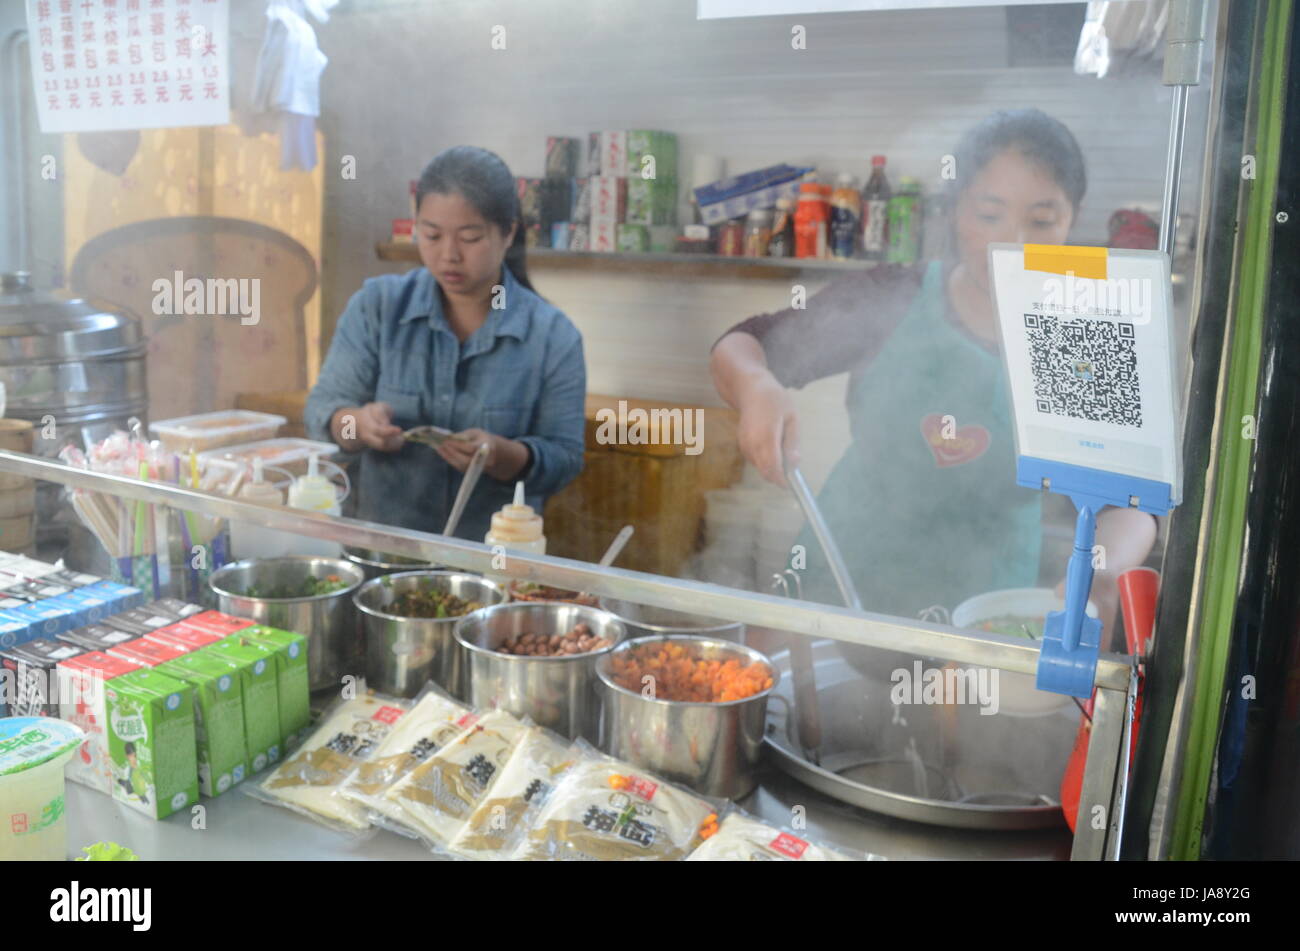 China is going cashless. People buy noodles with QR code and mobile phone, using Alipay, WeChat Wallet or other mobile wallet. Fintech is booming. Stock Photo